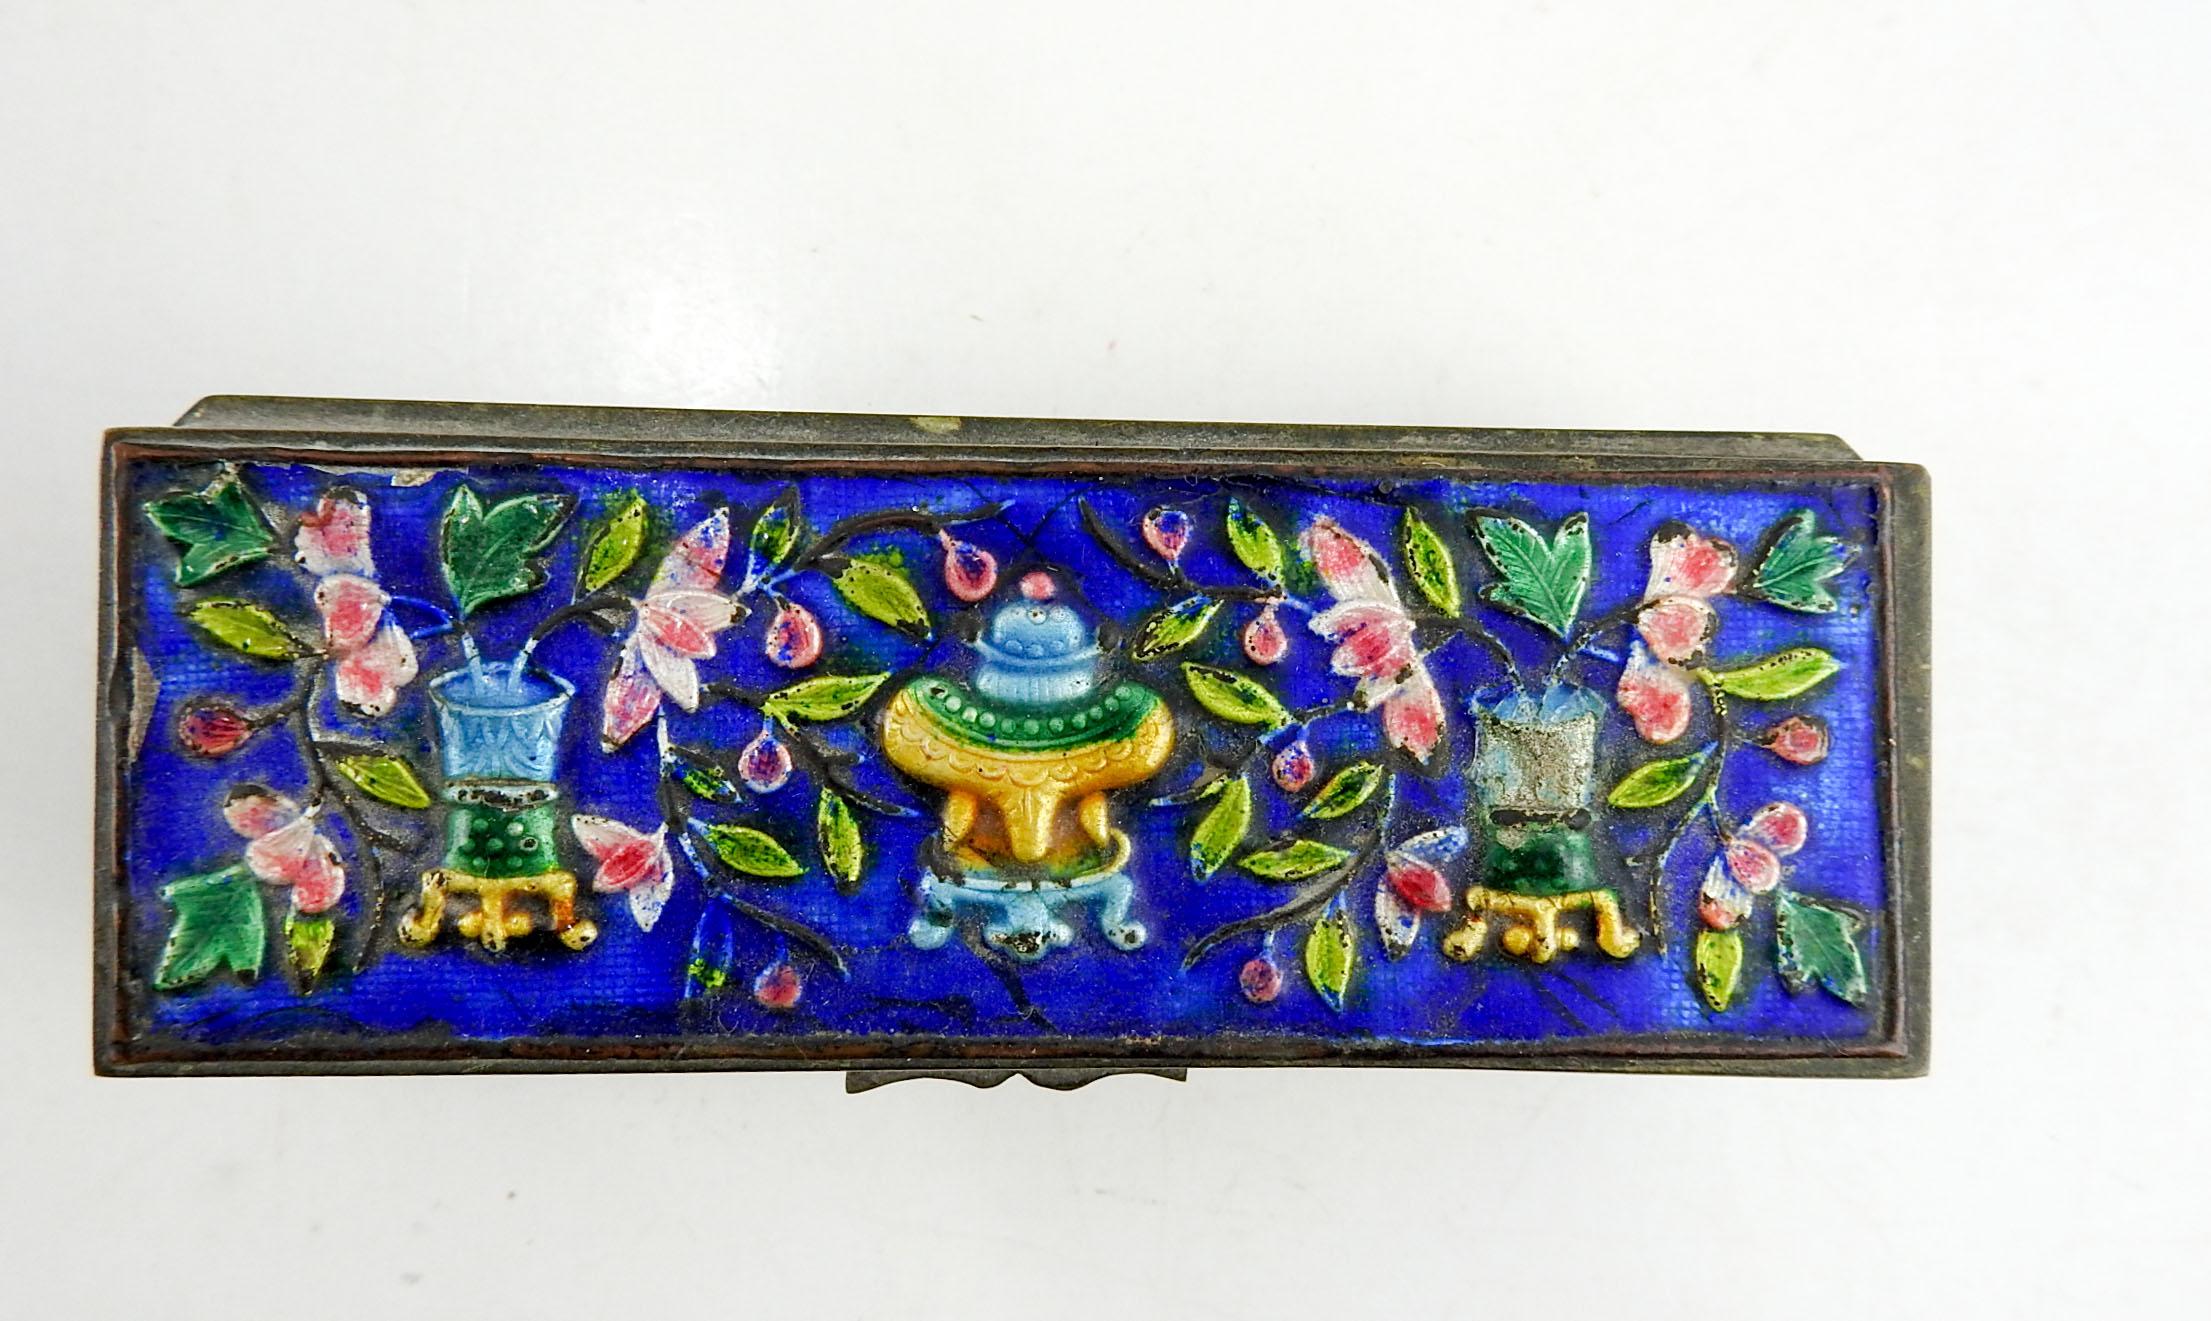 Small vintage brass stamp box with enamel decoration. Marked China on bottom and sloped interior bottom. Overall patina with a few tiny dings to enamel.